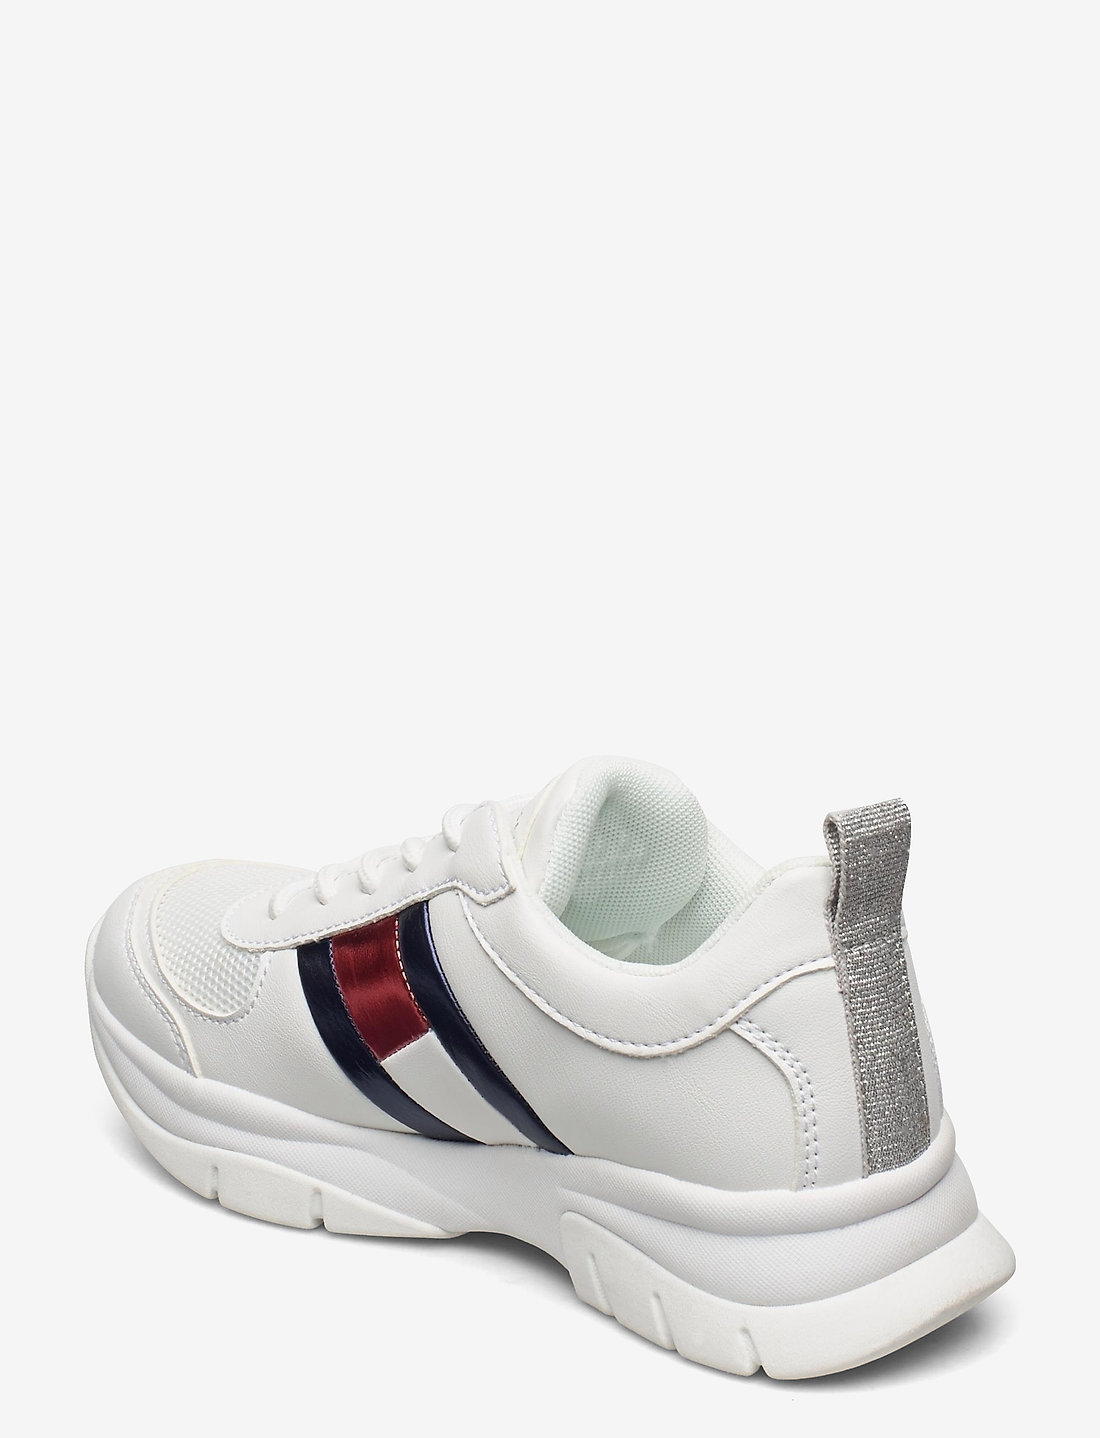 Tommy Hilfiger Low Cut Lace-up Sneaker - Low Tops